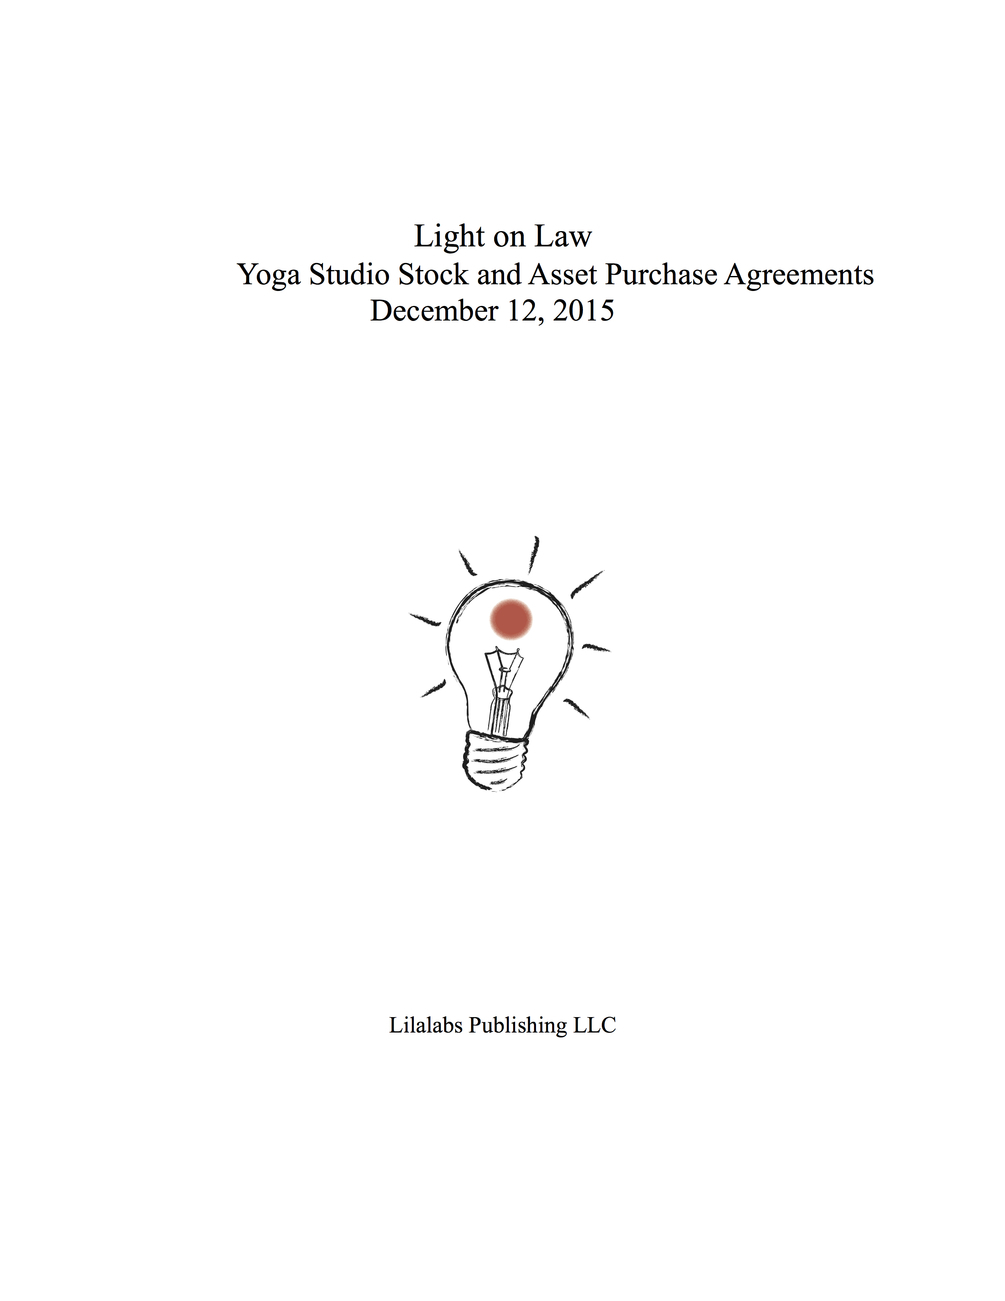 Asset Purchase Agreement Vs Stock Purchase Stock And Asset Purchase Agreements For Yoga Studios And Wellness Businesses